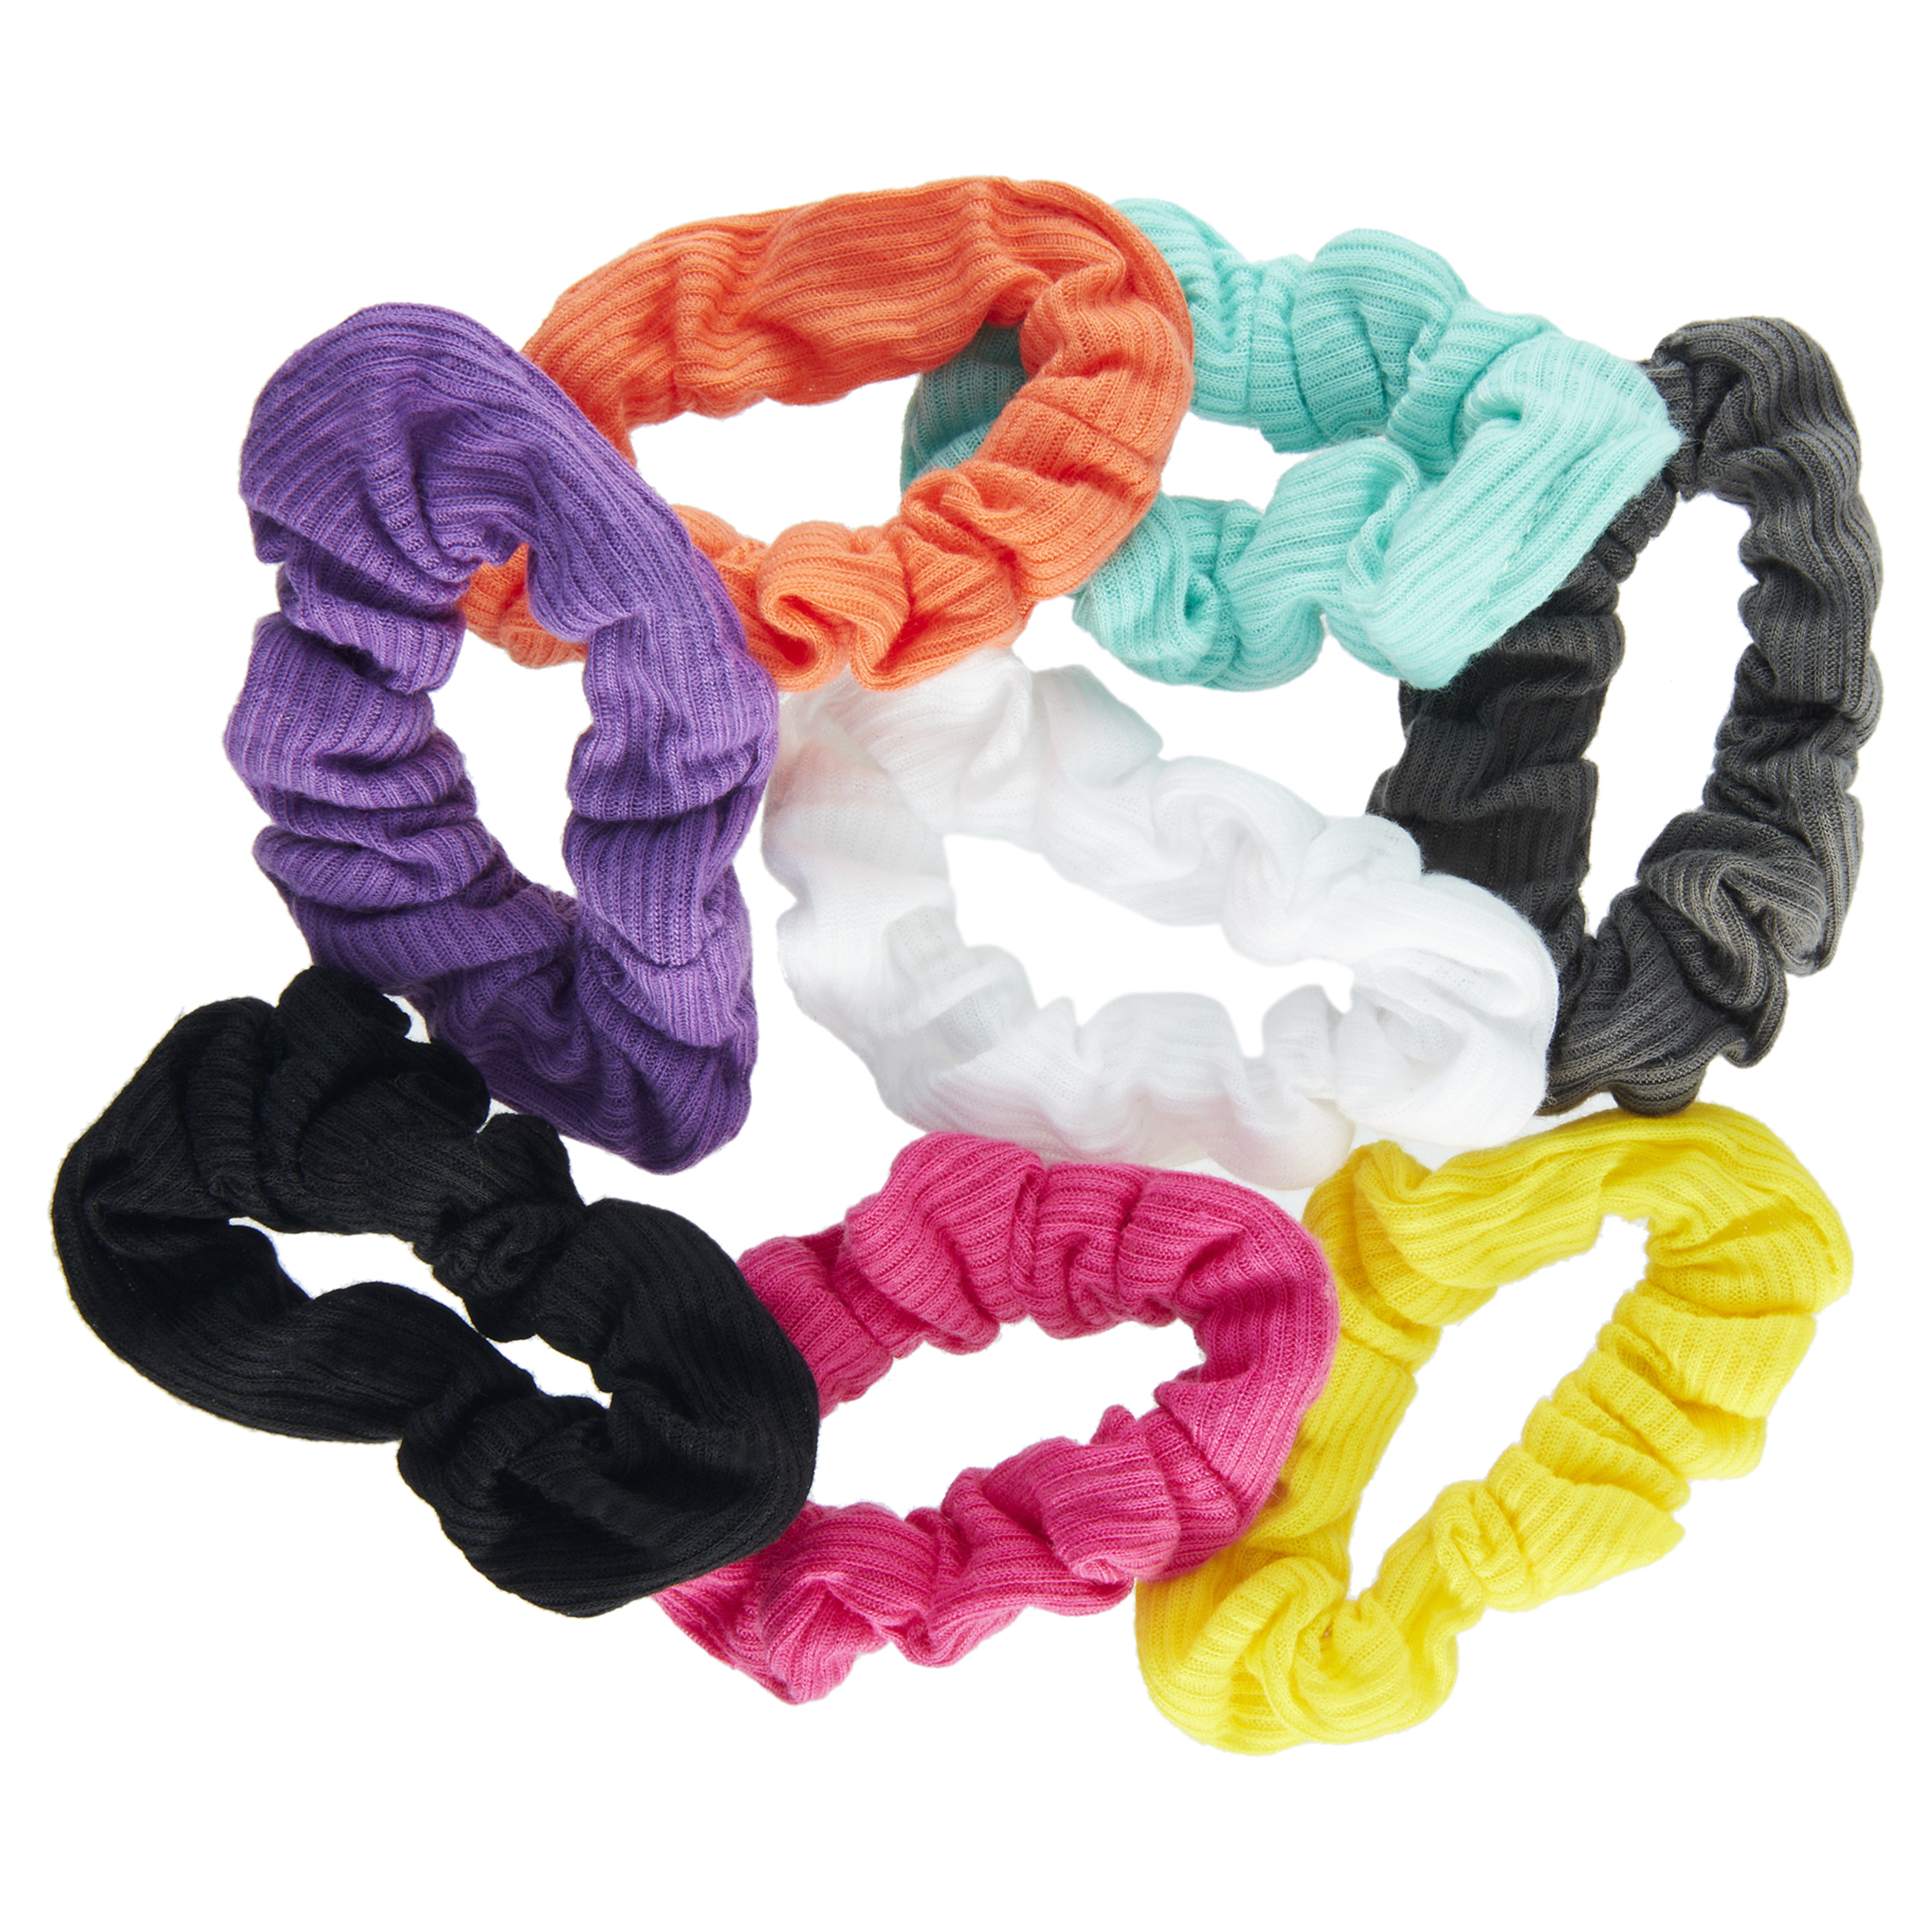 Goody® Ouchless® Scrunchies, Gentle Hair Scrunchies, Neon Lights, 8 Ct - image 2 of 3